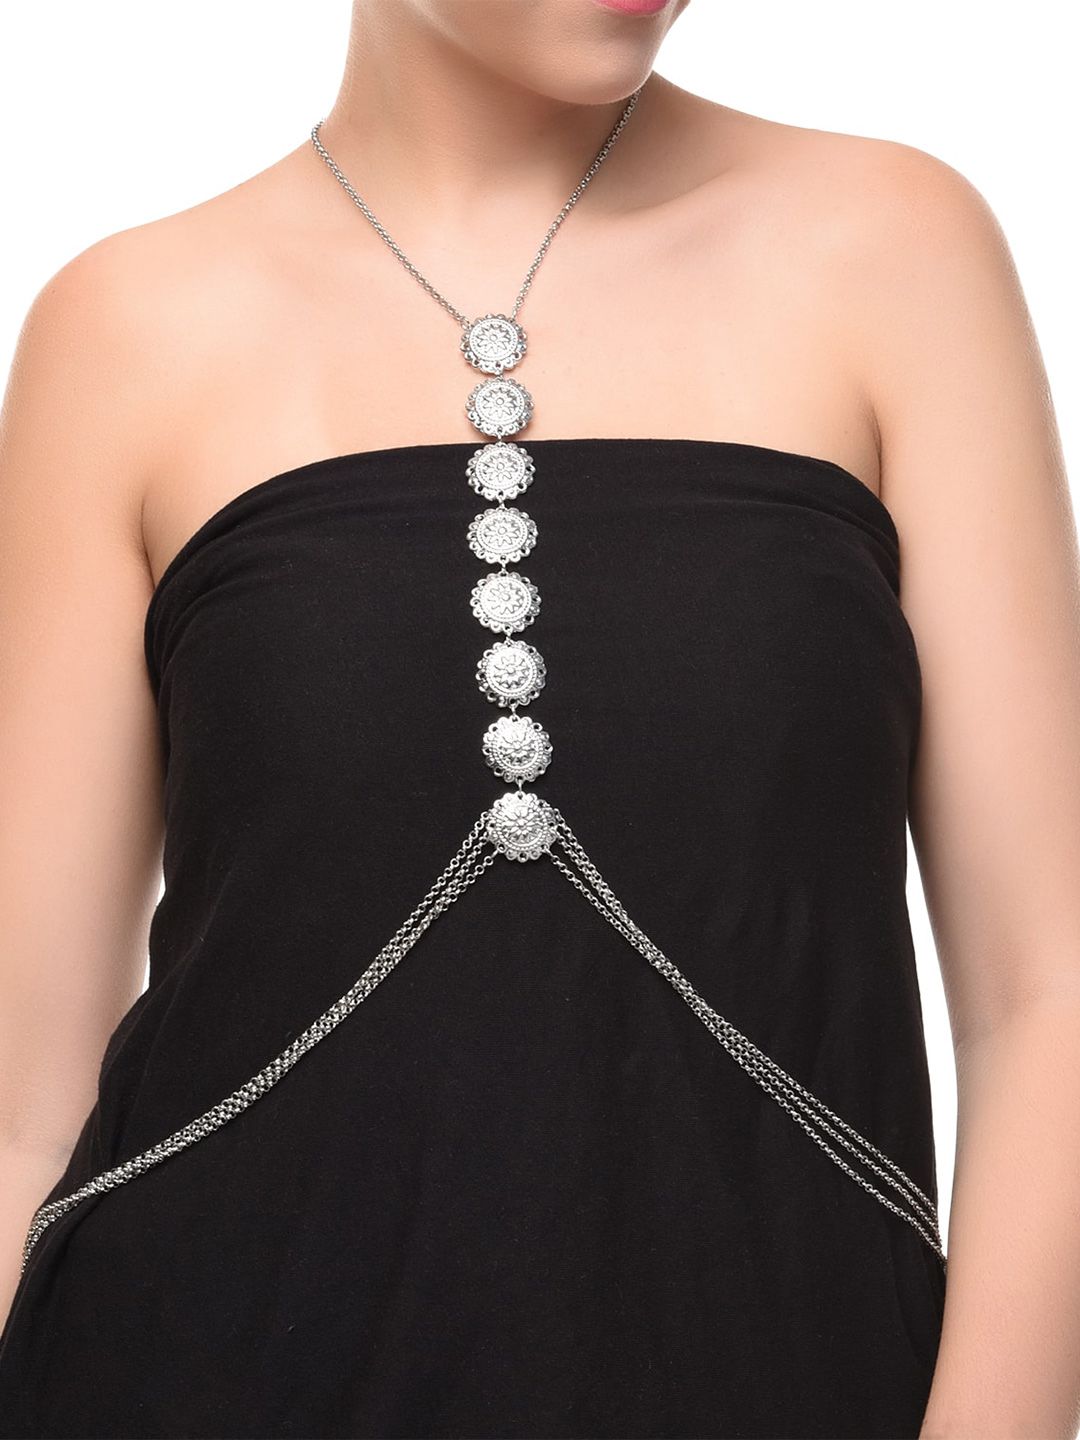 FemNmas Silver-Toned Silver-Plated Body Chain Price in India